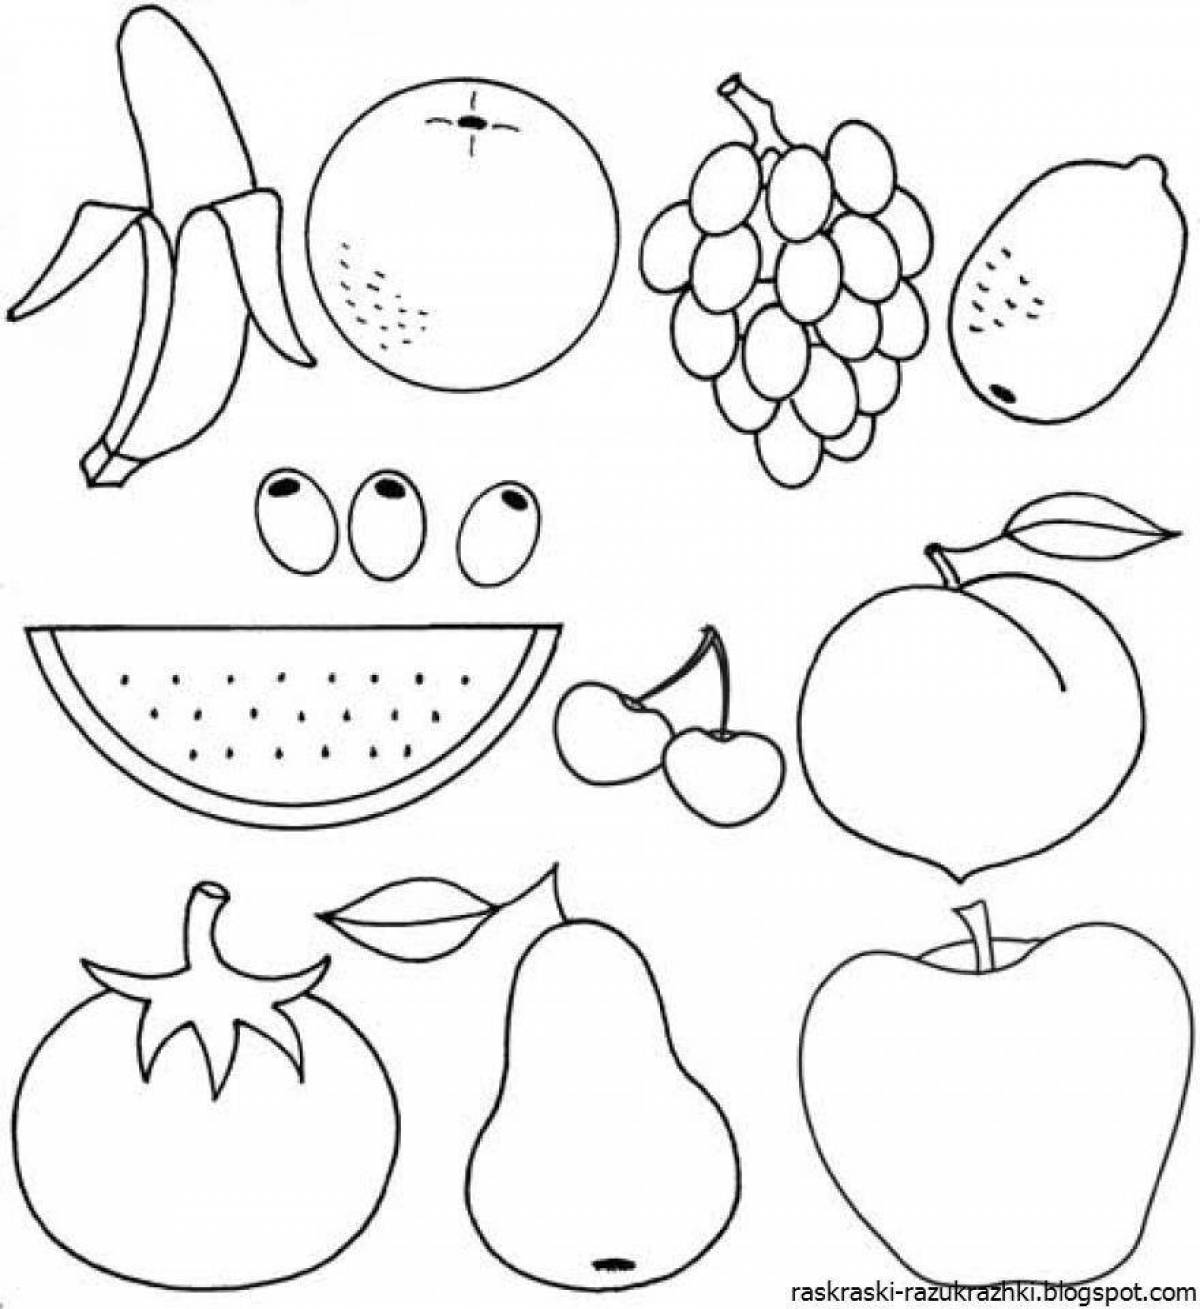 Invitation fruit and vegetables coloring book